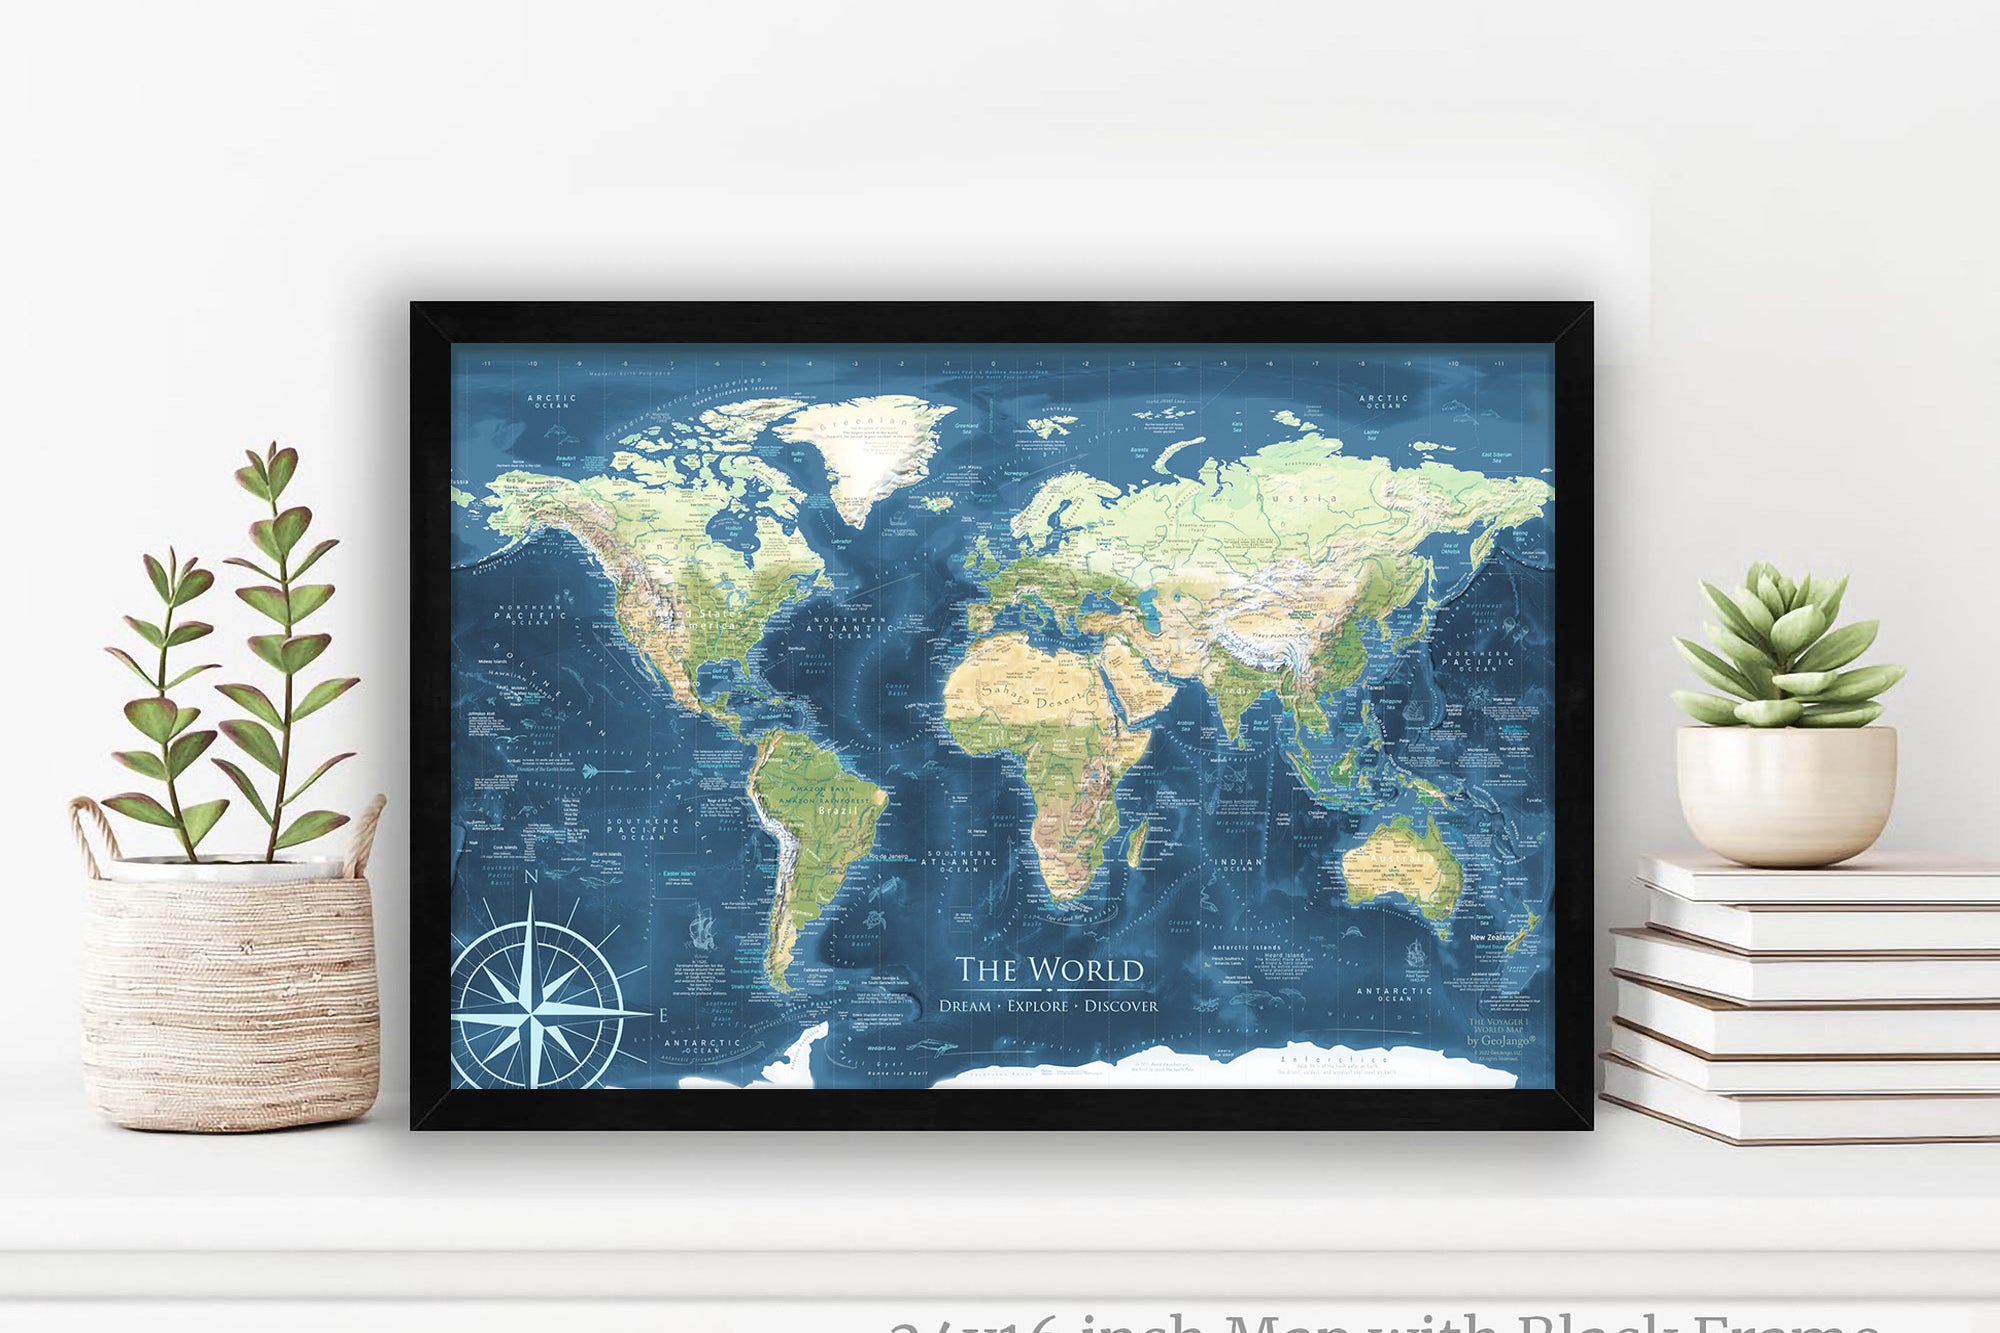 small world pushpin map with blue oceans